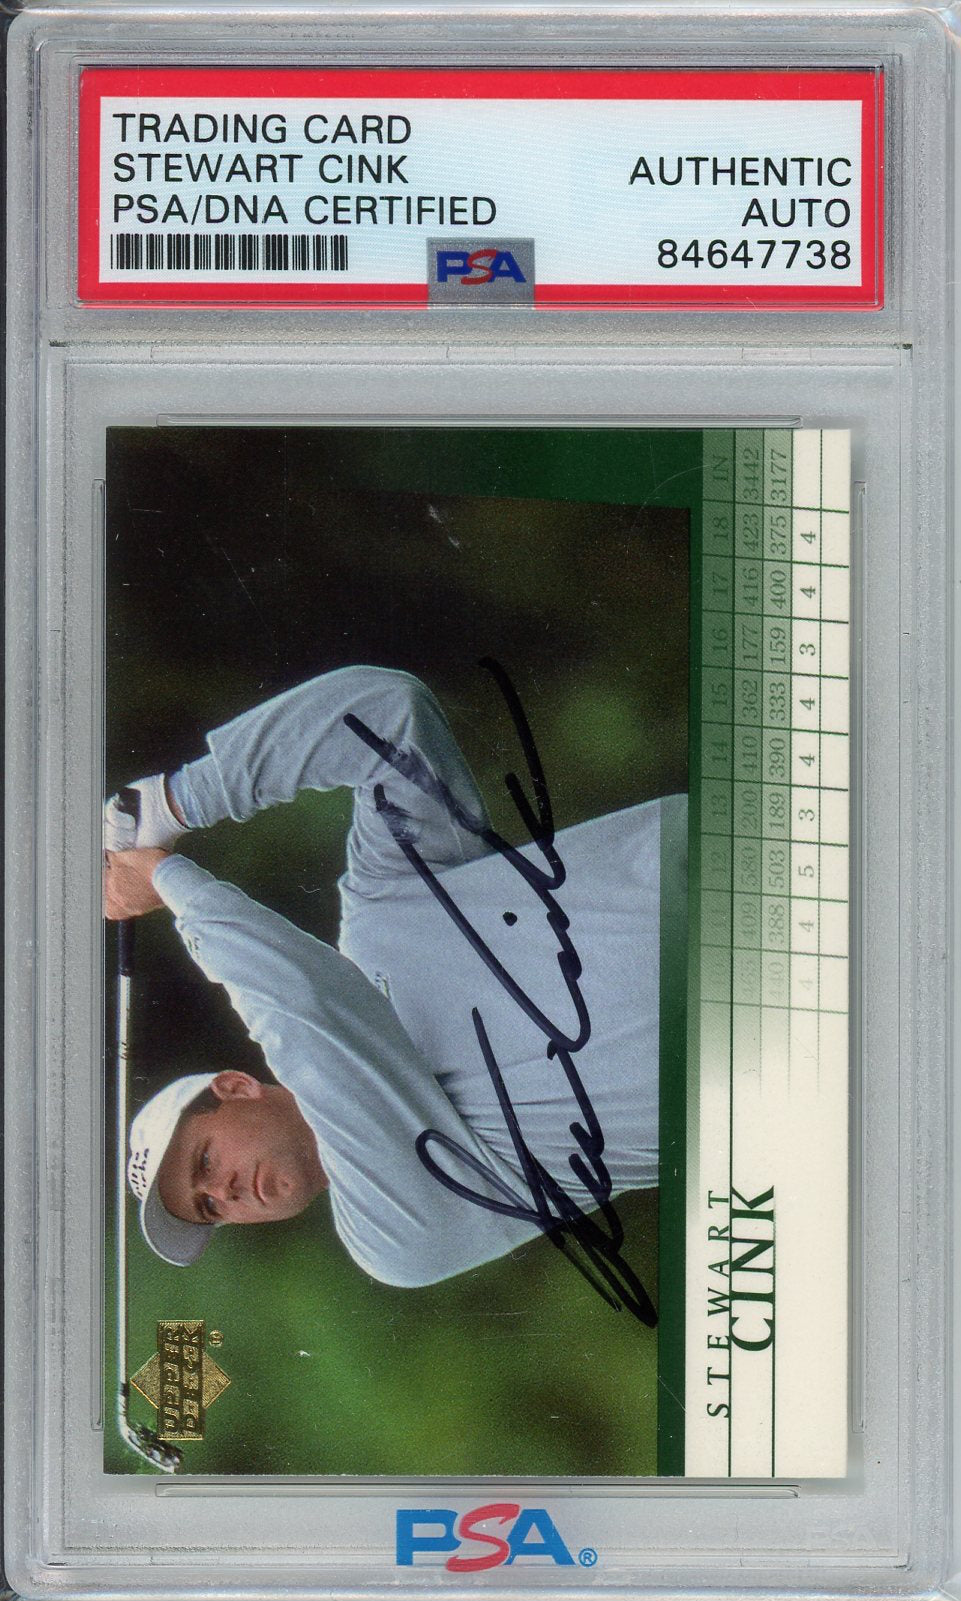 STEWART CINK SIGNED PSA/DNA CERTIFIED AUTHENTIC AUTOGRAPH CARD